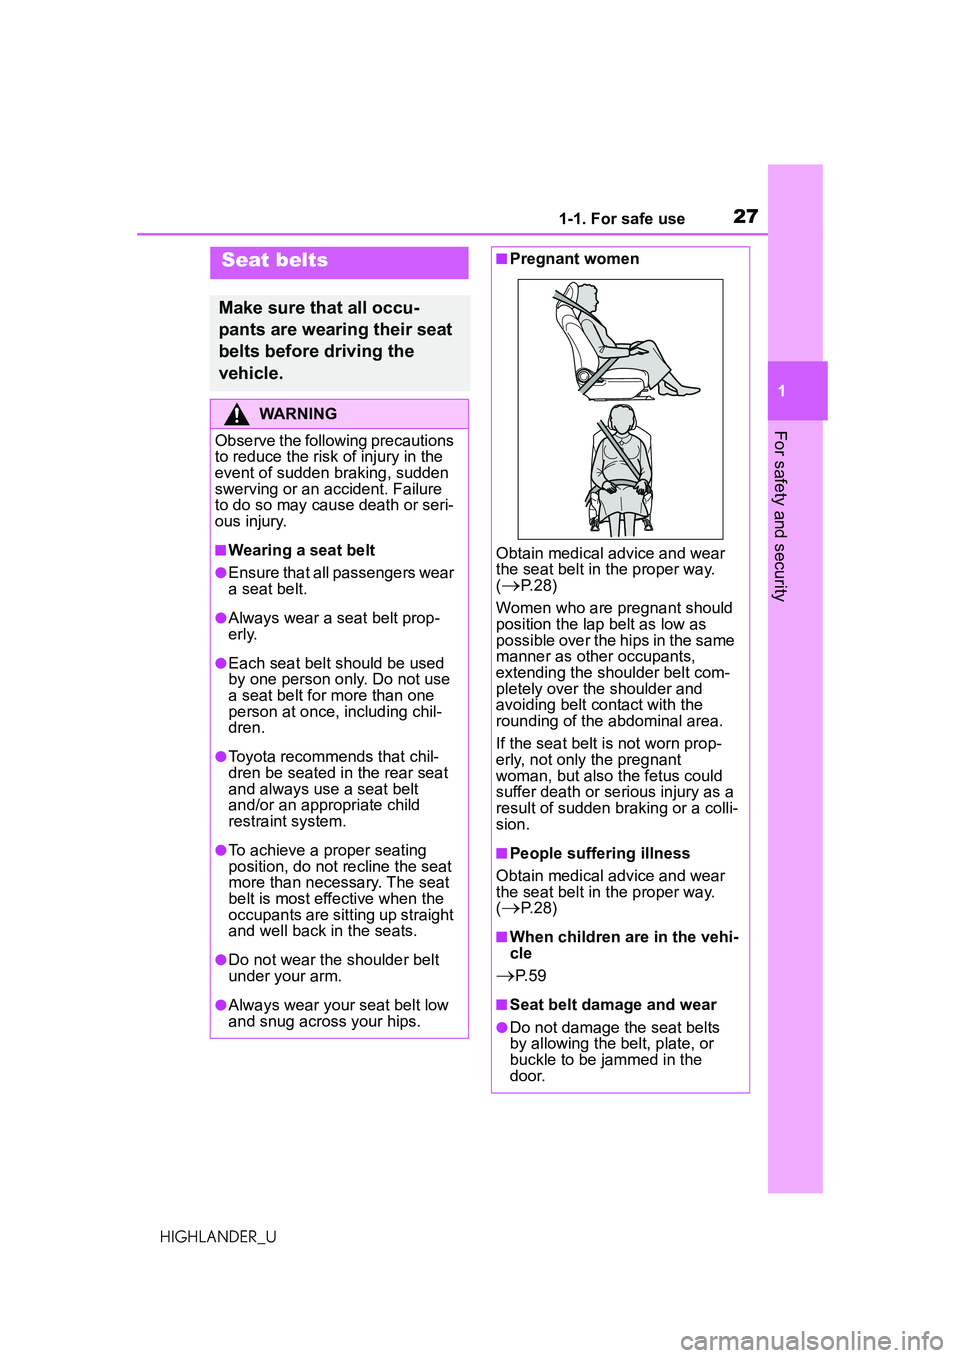 TOYOTA HIGHLANDER 2021  Owners Manual (in English) 271-1. For safe use
1
For safety and security
HIGHLANDER_U
Seat belts
Make sure that all occu-
pants are wearing their seat 
belts before driving the 
vehicle.
WARNING
Observe the following precaution